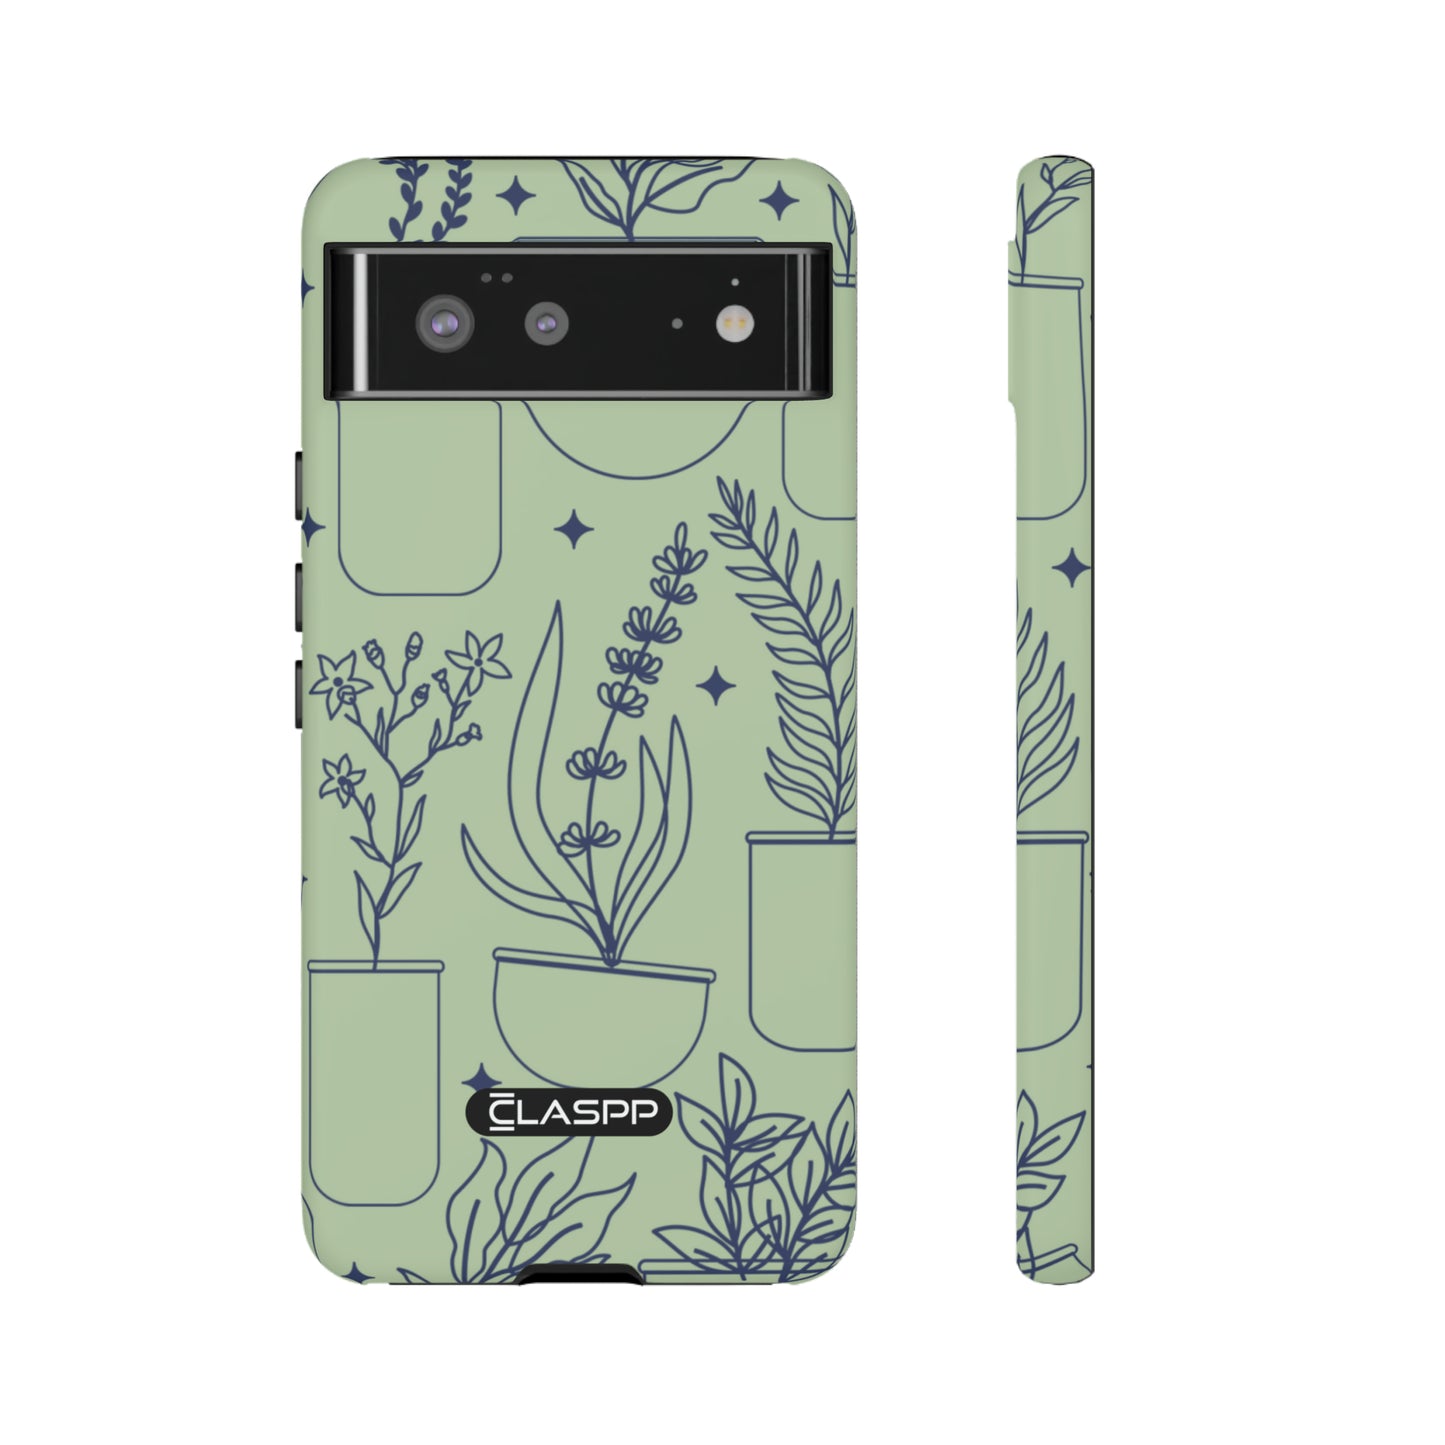 Horticulturist | Hardshell Dual Layer Phone Case